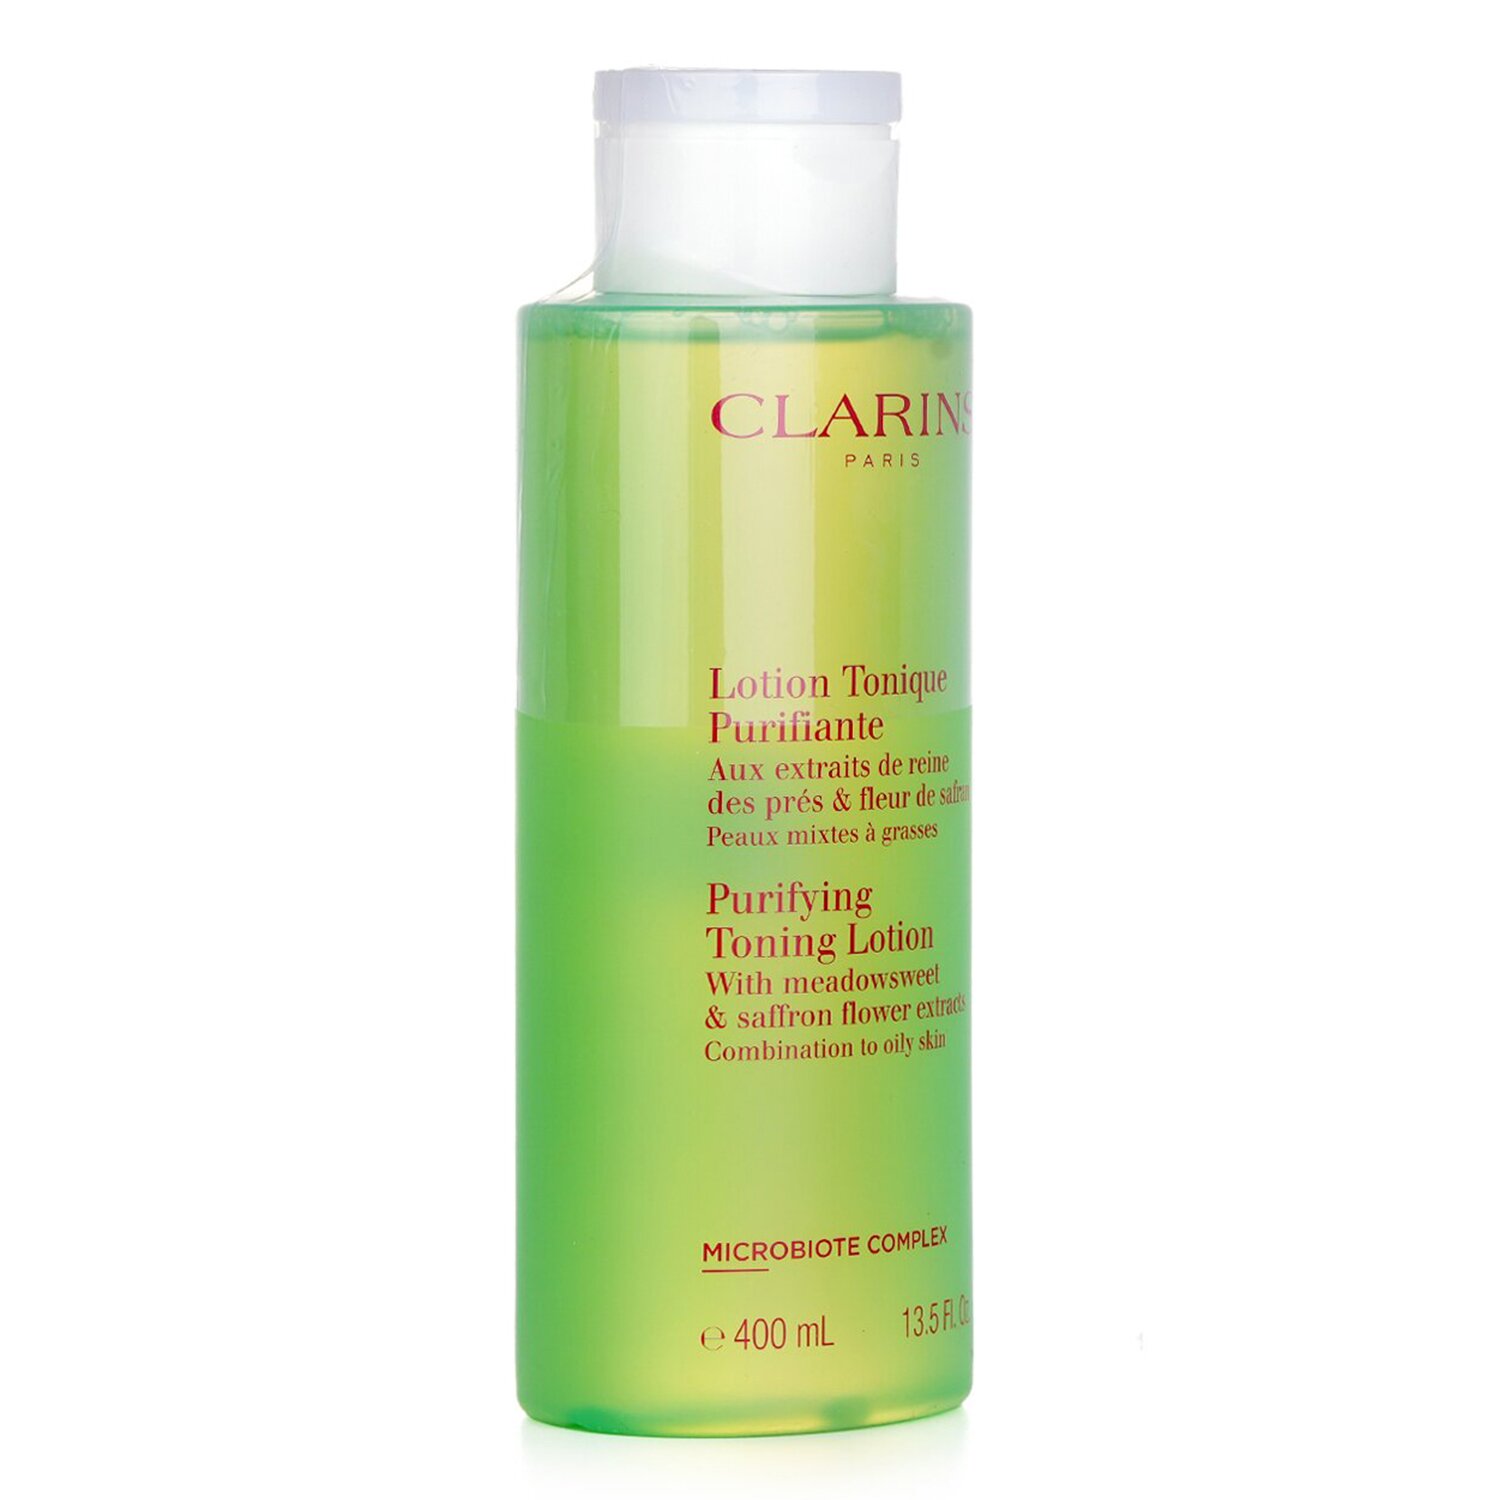 Clarins Purifying Toning Lotion with Meadowsweet & Saffron Flower Extracts - Combination to Oily Skin 400ml/13.5oz